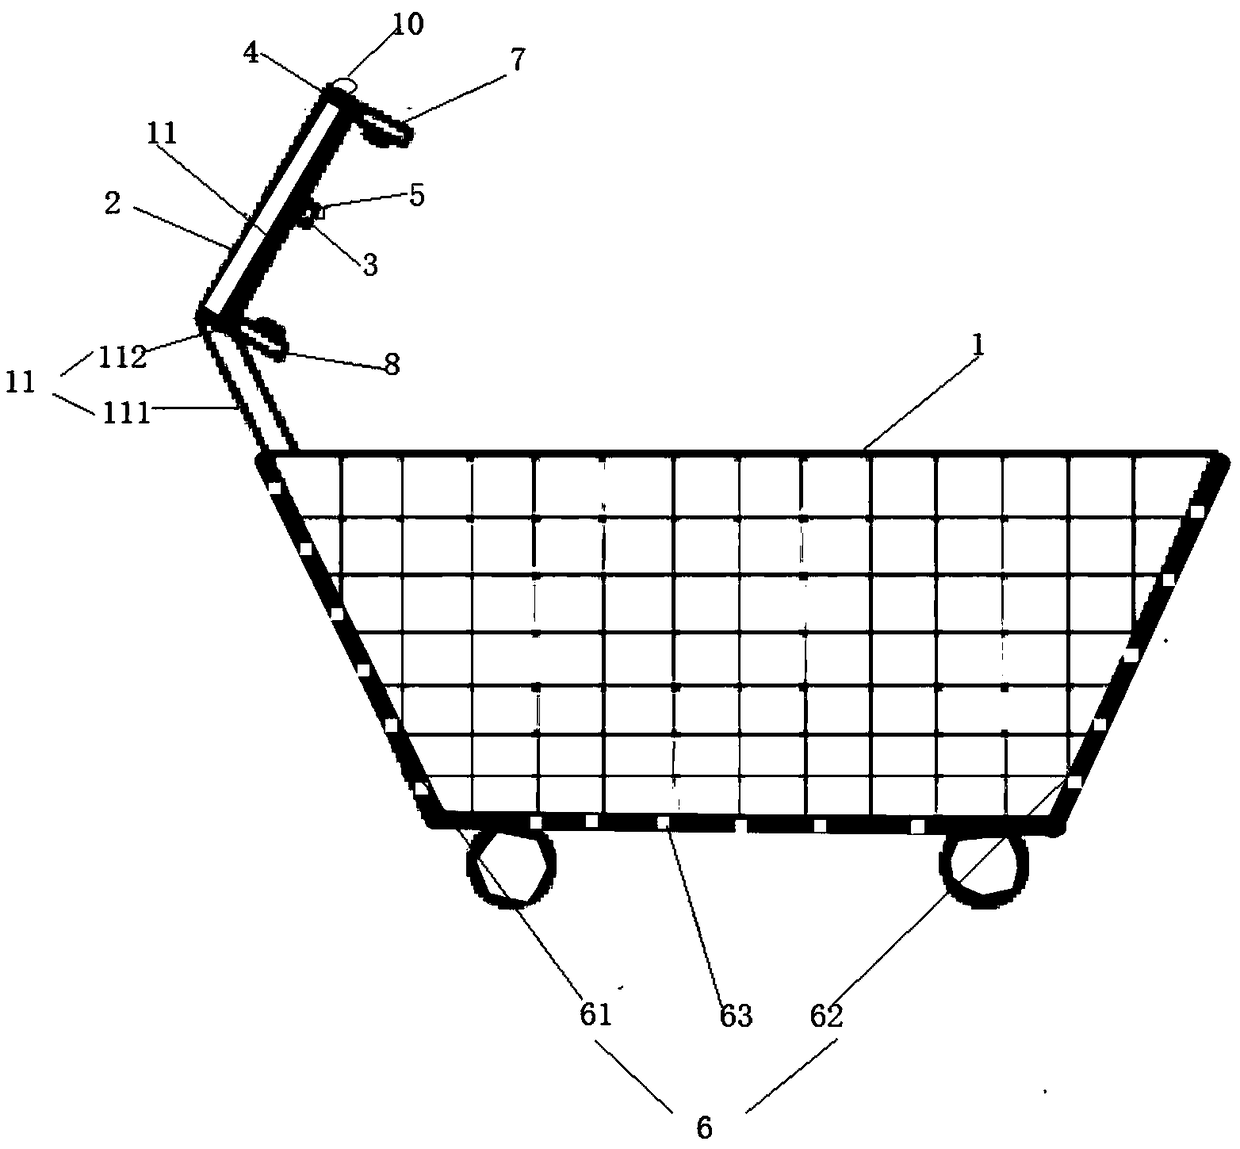 A supermarket shopping cart and working method based on artificial intelligence and internet of things technology